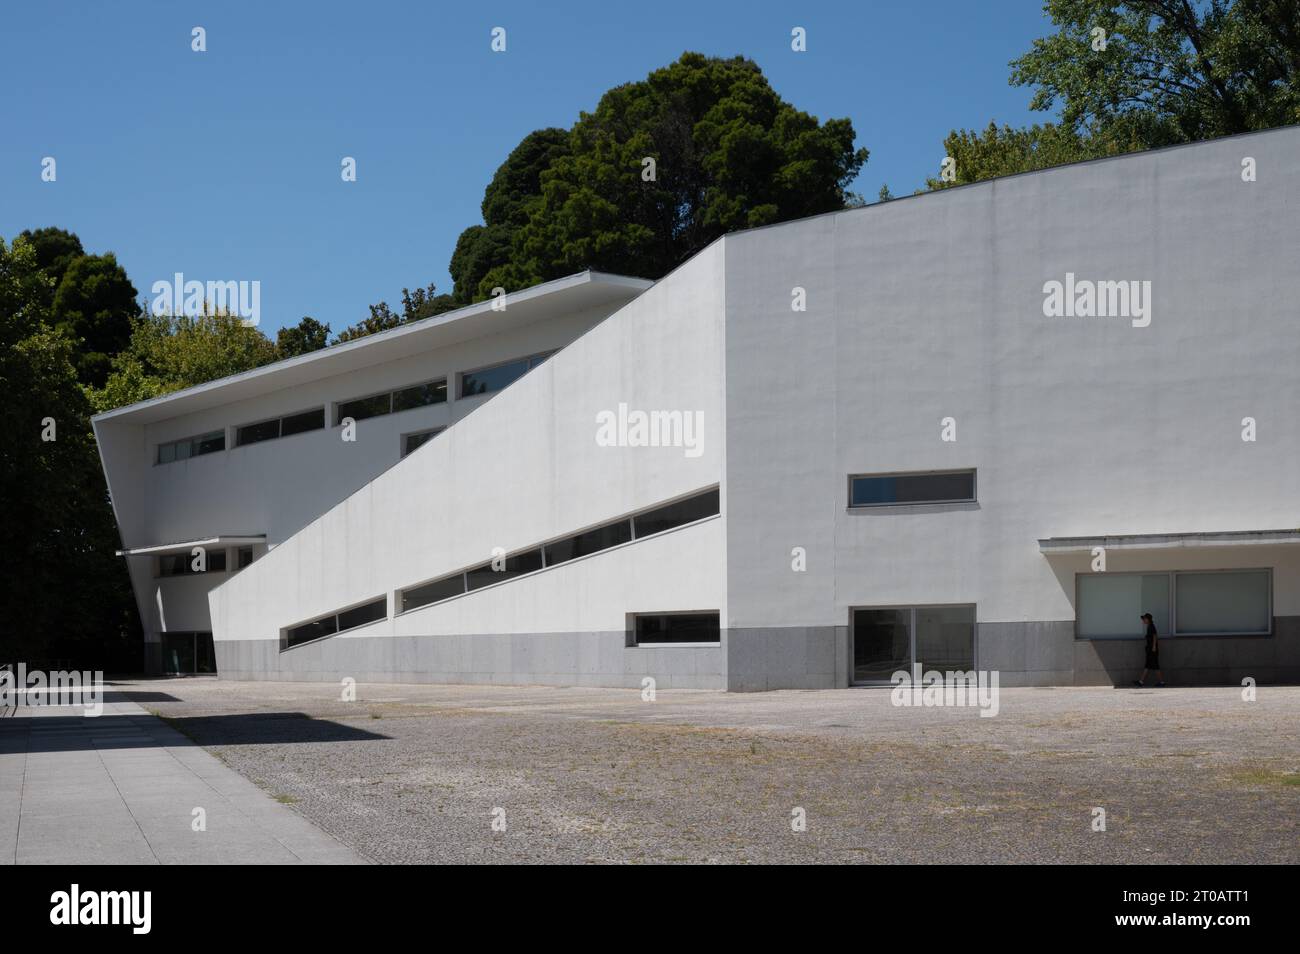 The Faculty of Architecture of the University of Porto building by famous architect Alvaro Siza Vieira Stock Photo